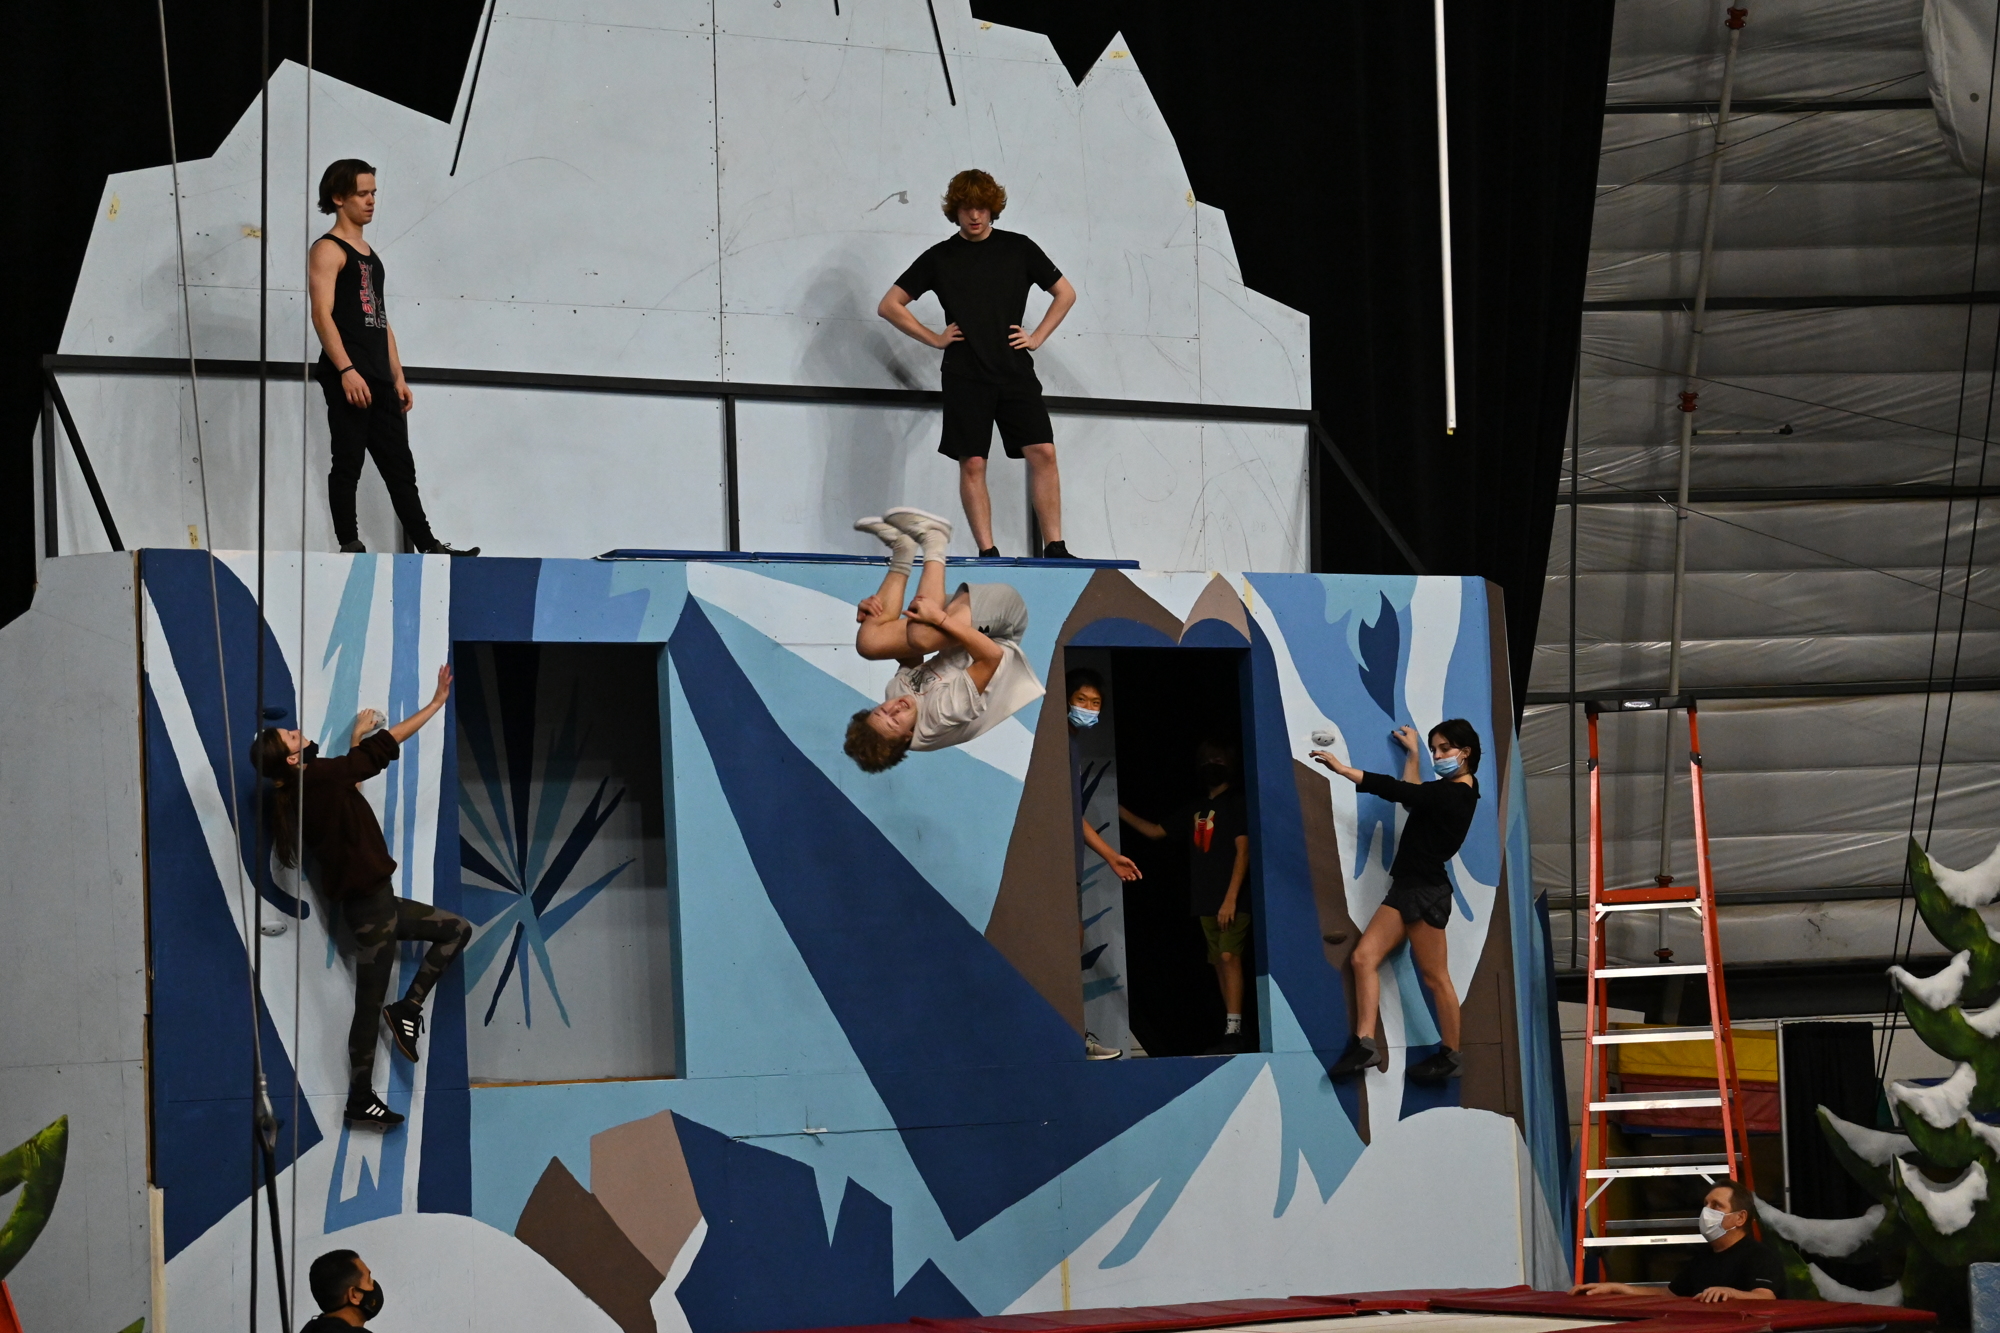 The Circus Arts Conservatory is bringing its high flying Let It Snow show to the public. (Photo: Spencer Fordin)